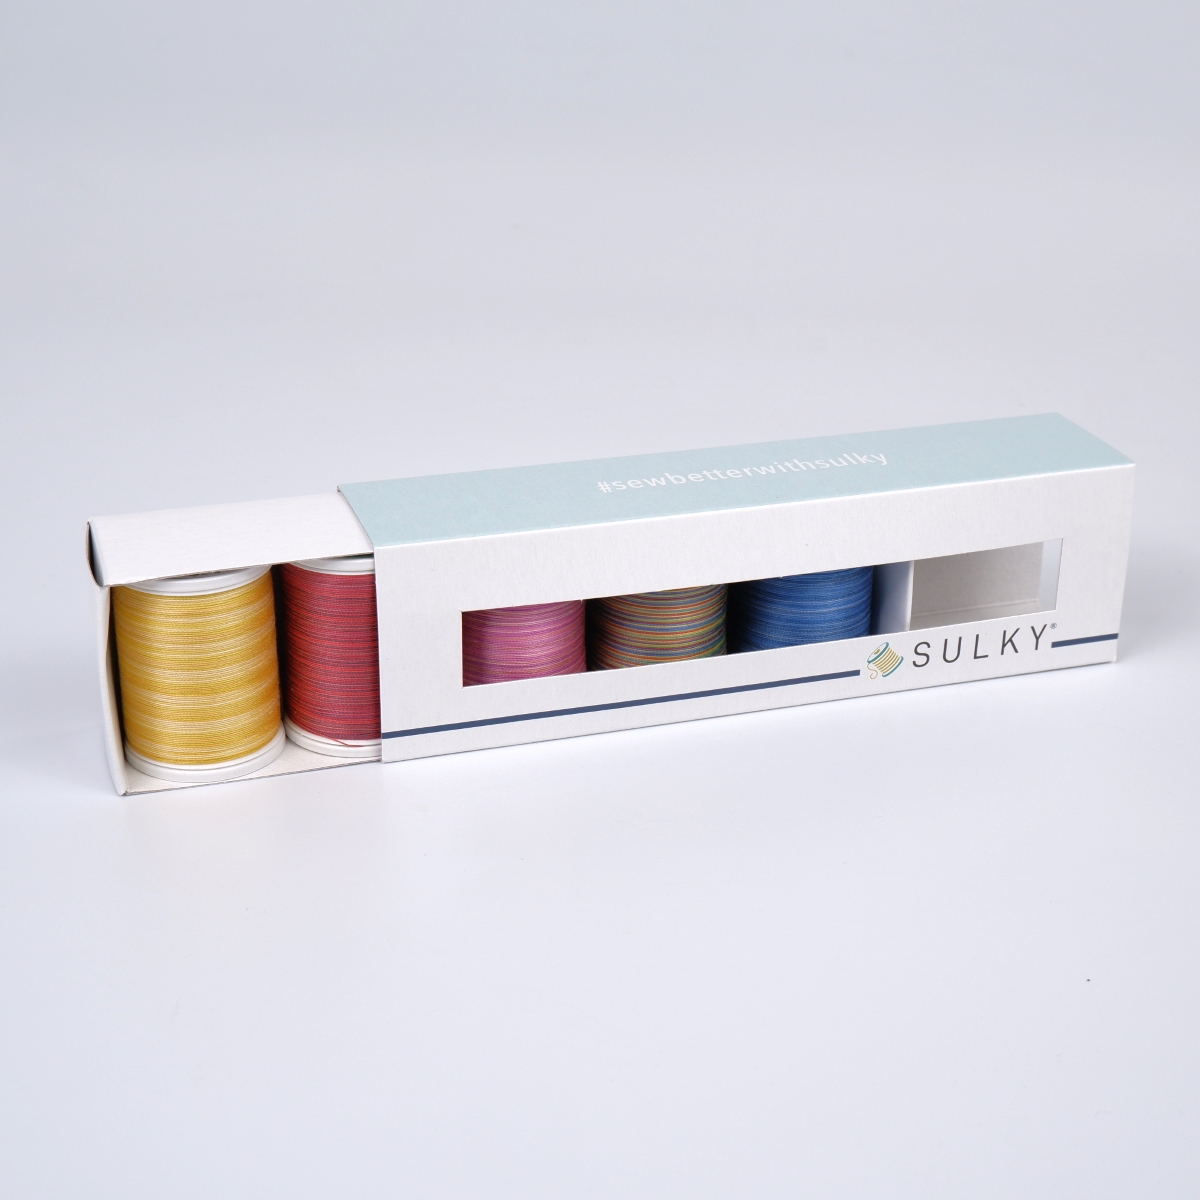 SULKY COTTON 30 - BESTSELLER
MULTICOLOR (5x 450m King Spools)